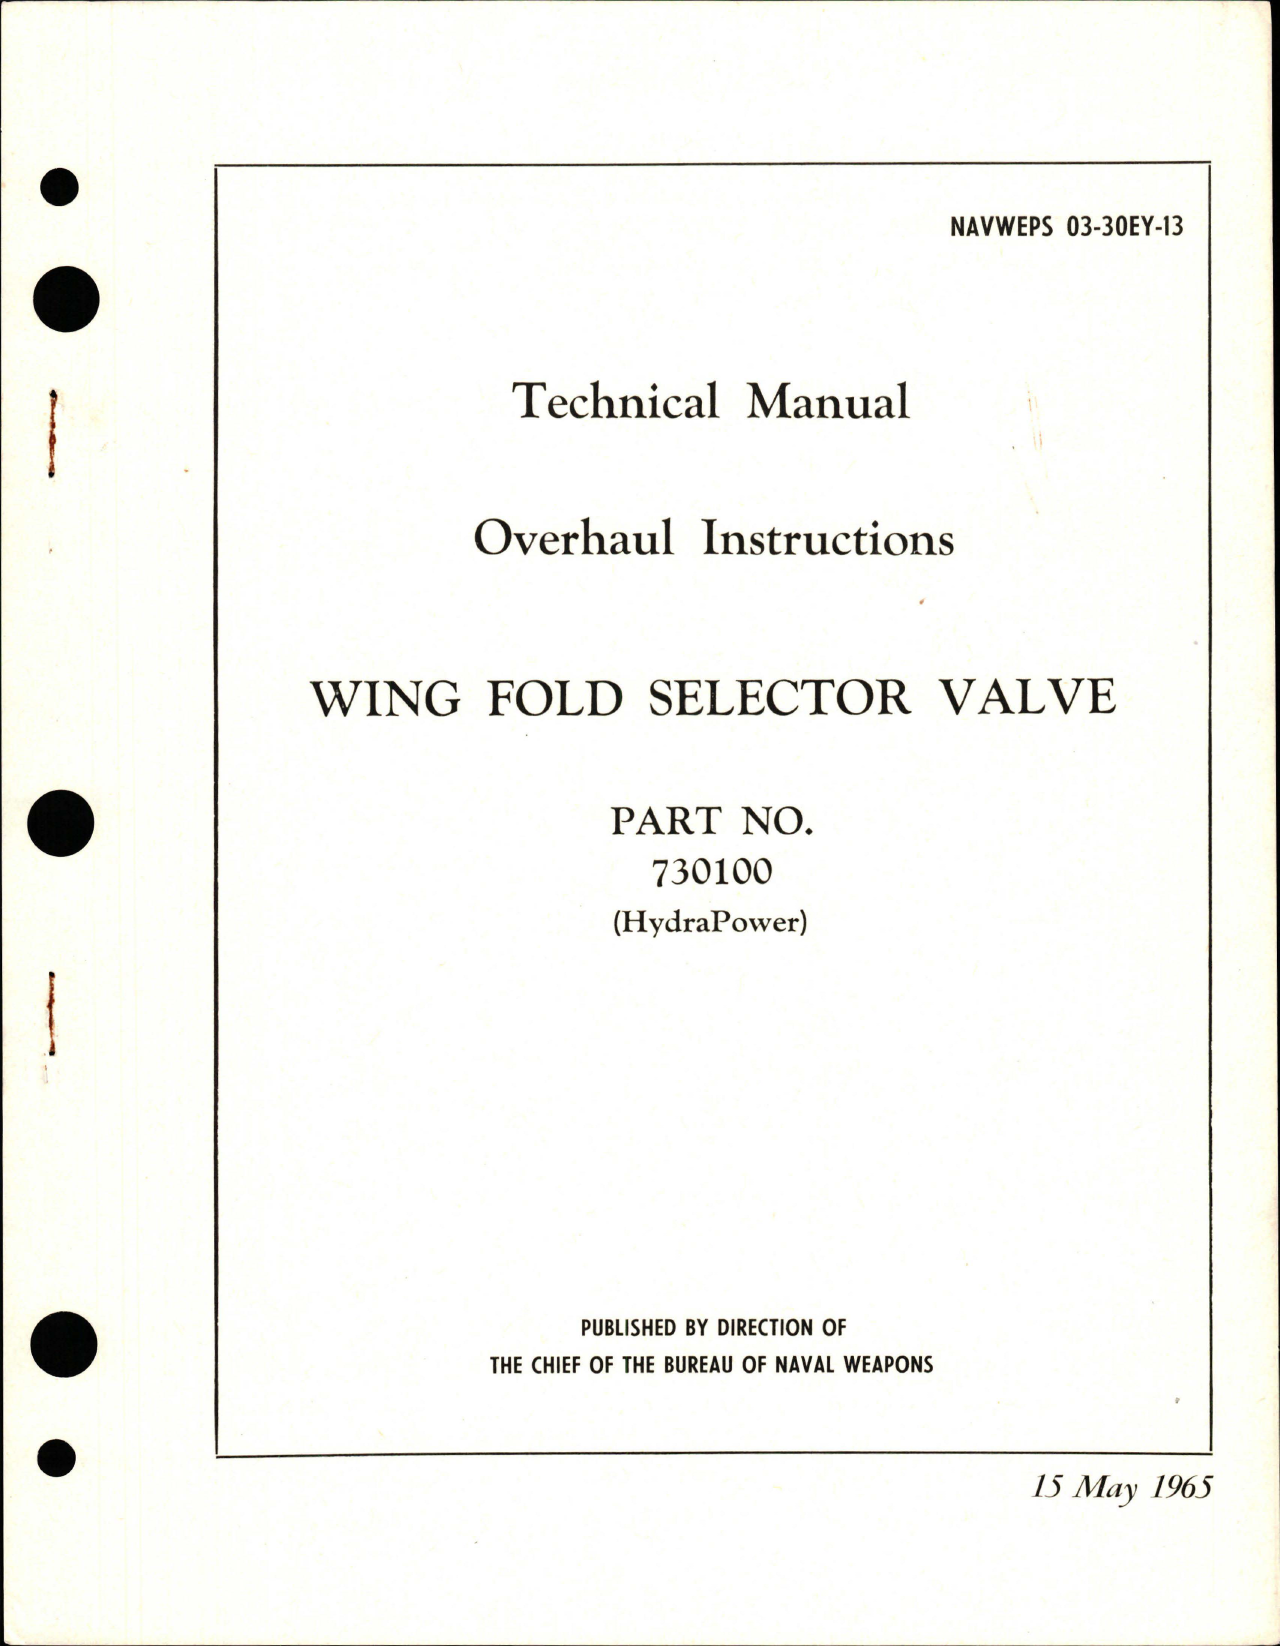 Sample page 1 from AirCorps Library document: Overhaul Instructions for Wing Fold Selector Valve - Part 730100